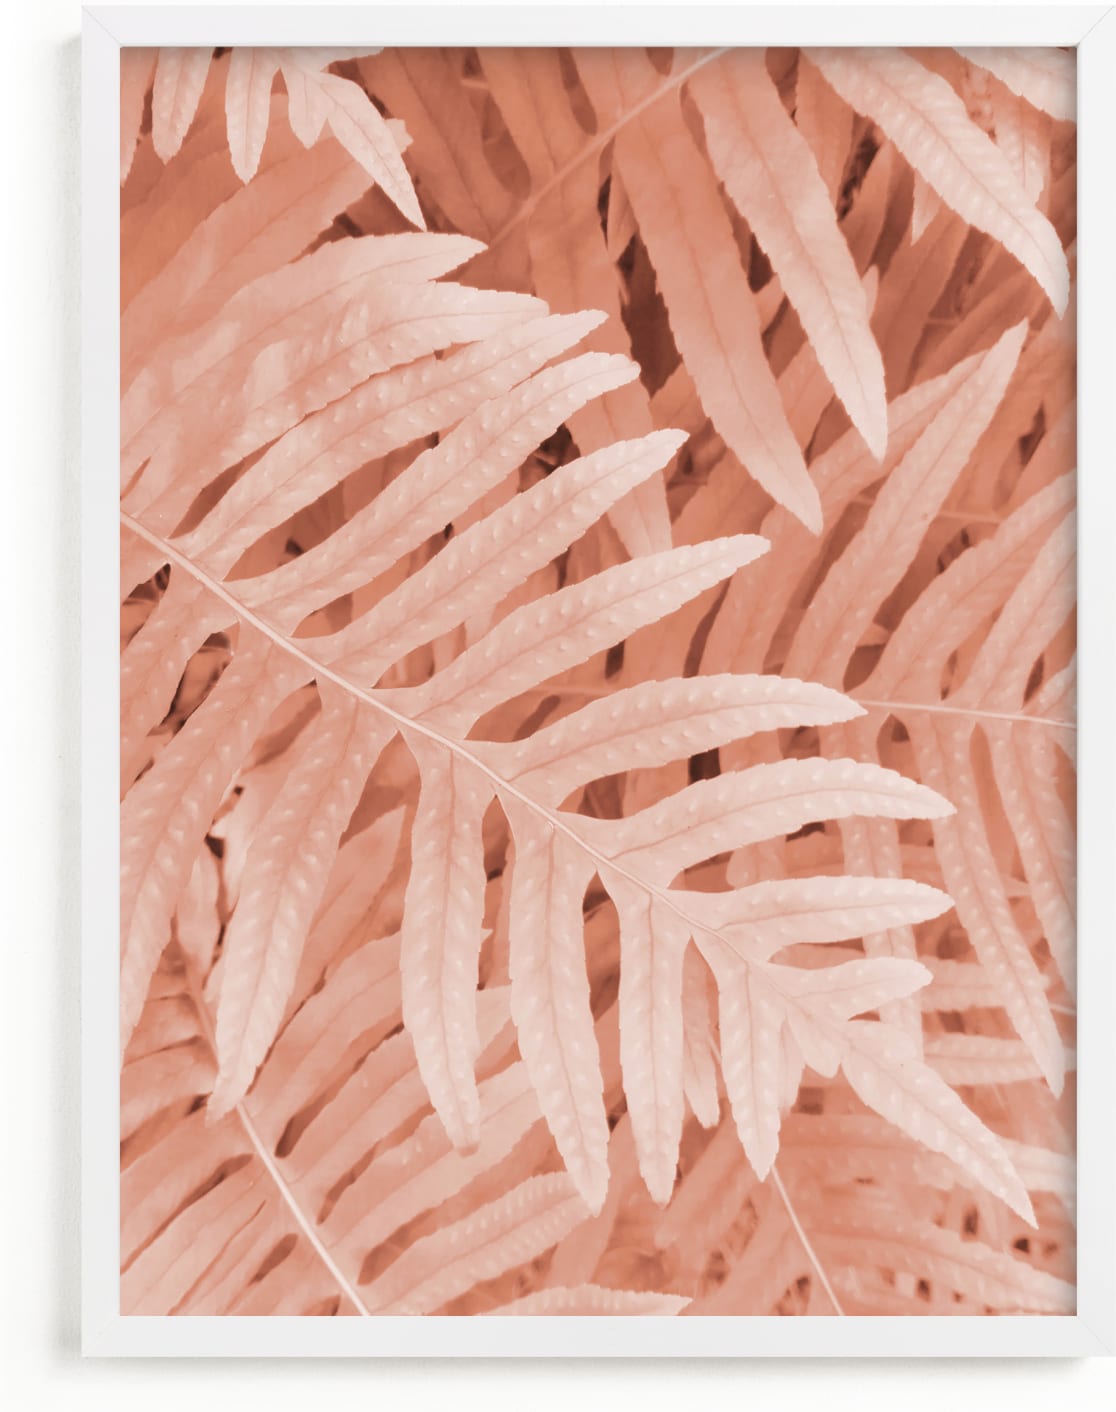 This is a pink art by EMANUELA CARRATONI called Pink Ferns.